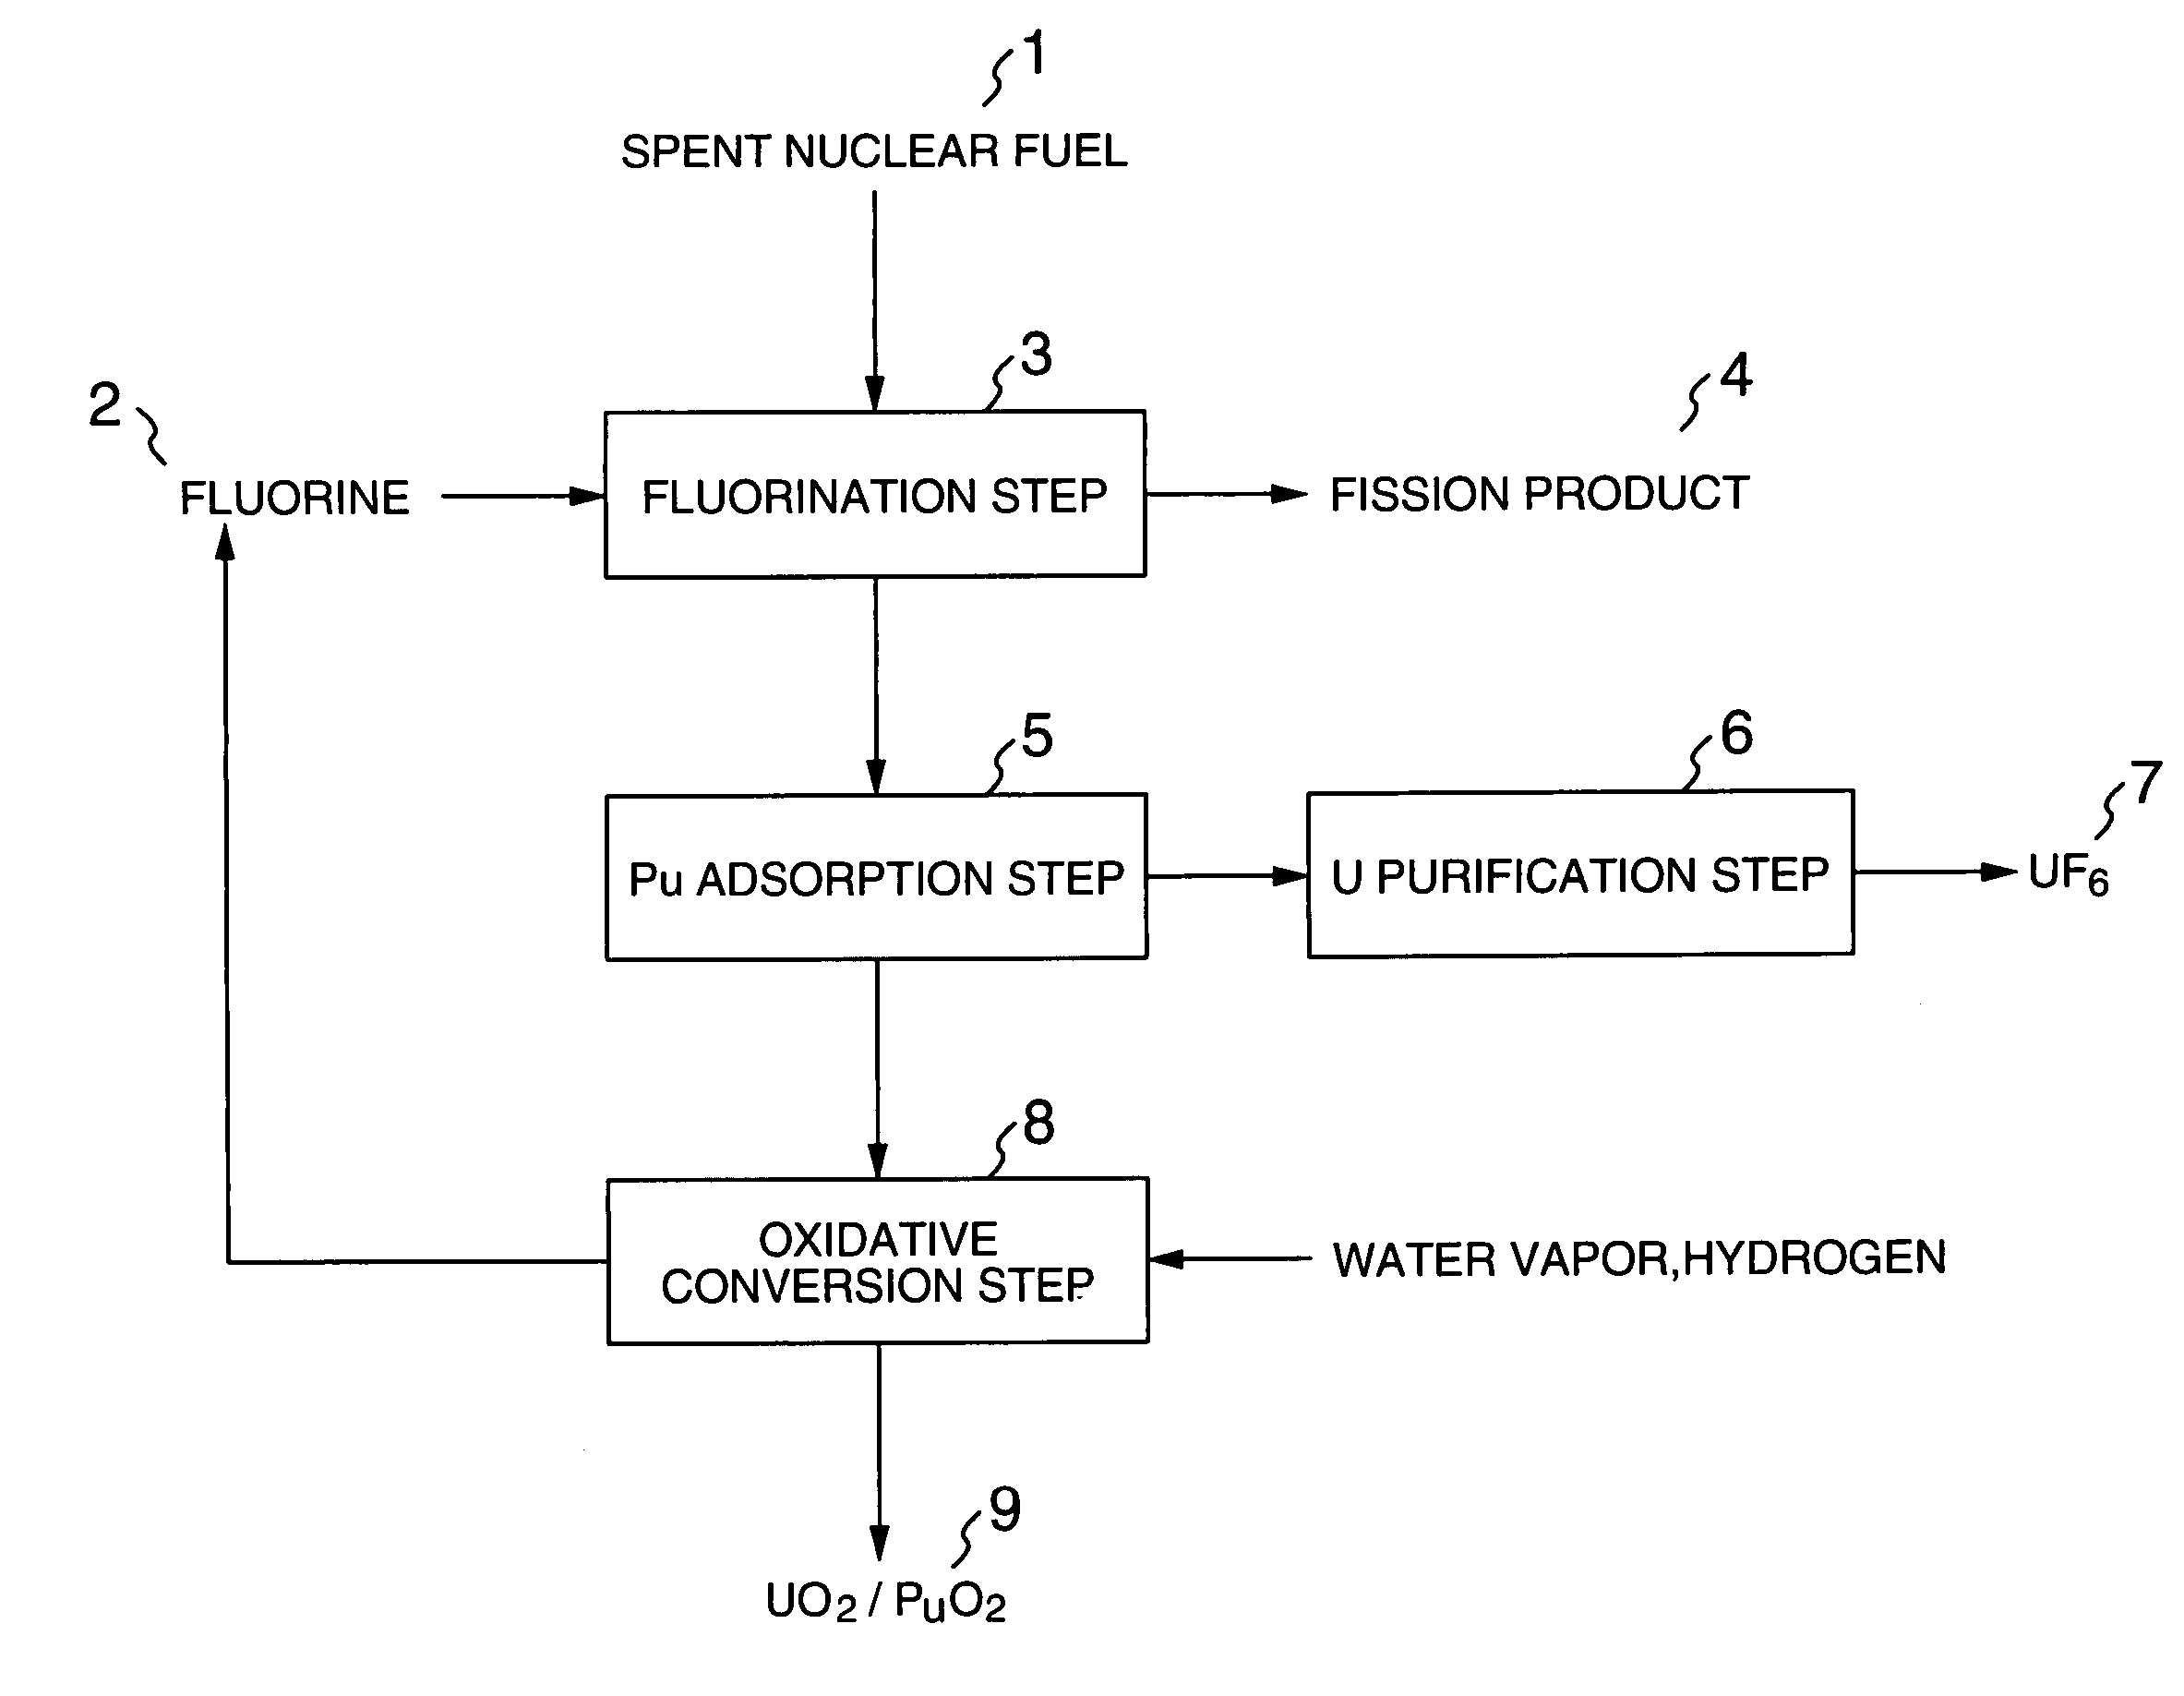 Method for reprocessing spent nuclear fuel